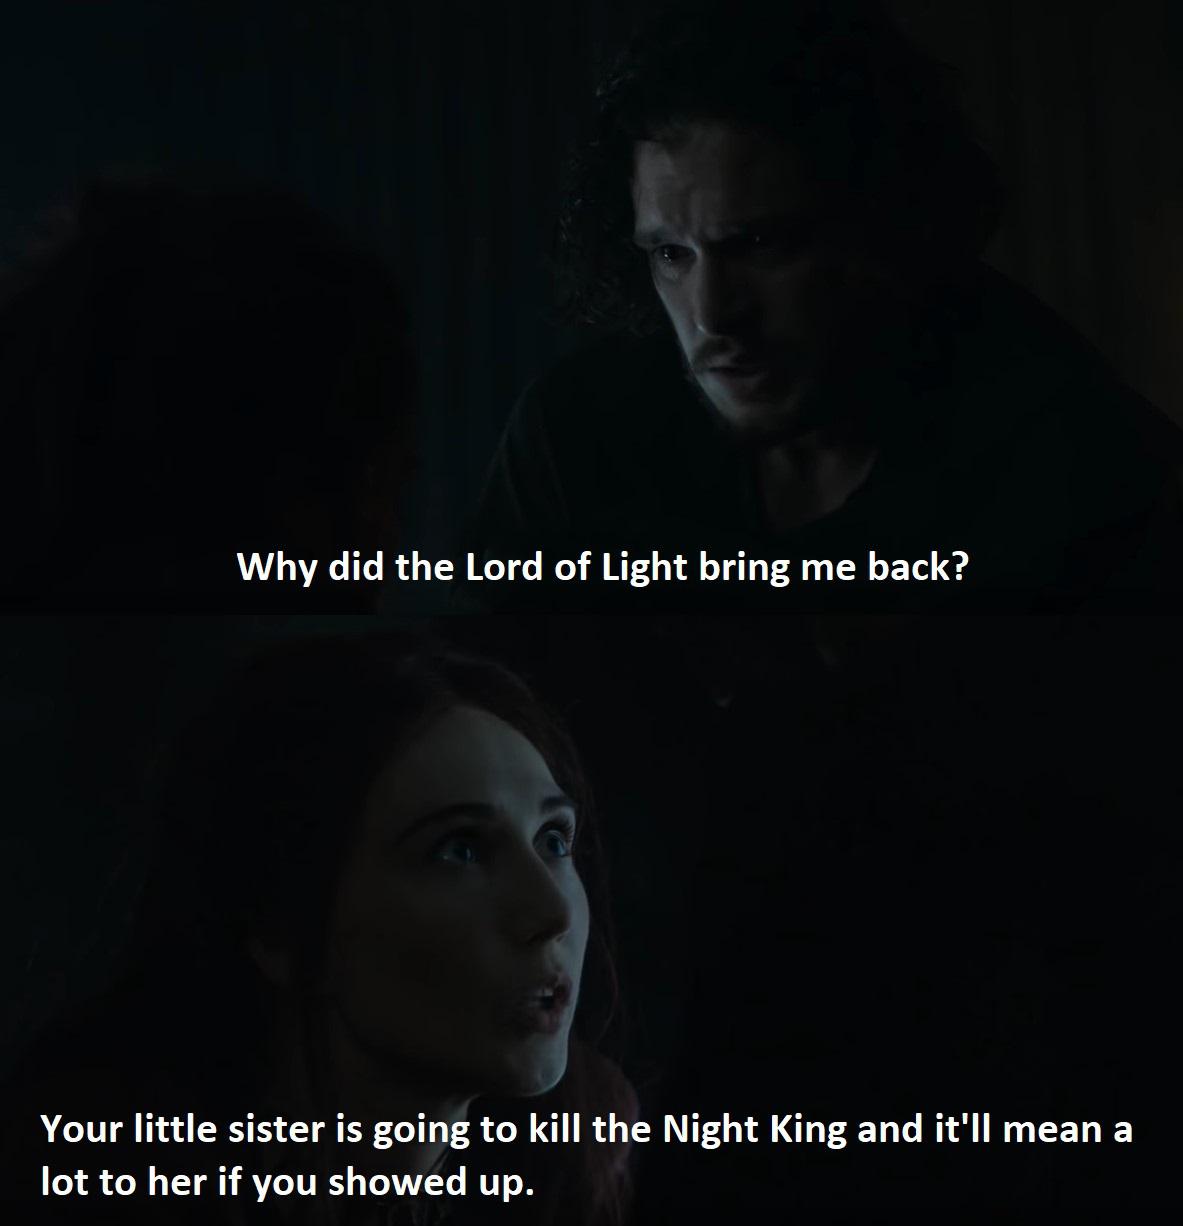 Game of thrones, Jon, Dany, Arya, Lord, Light Game of thrones memes Game of thrones, Jon, Dany, Arya, Lord, Light text: Why did the Lord of Light bring me back? Your little sister is going to kill the Night King and it'll mean a lot to her if you showed up. 